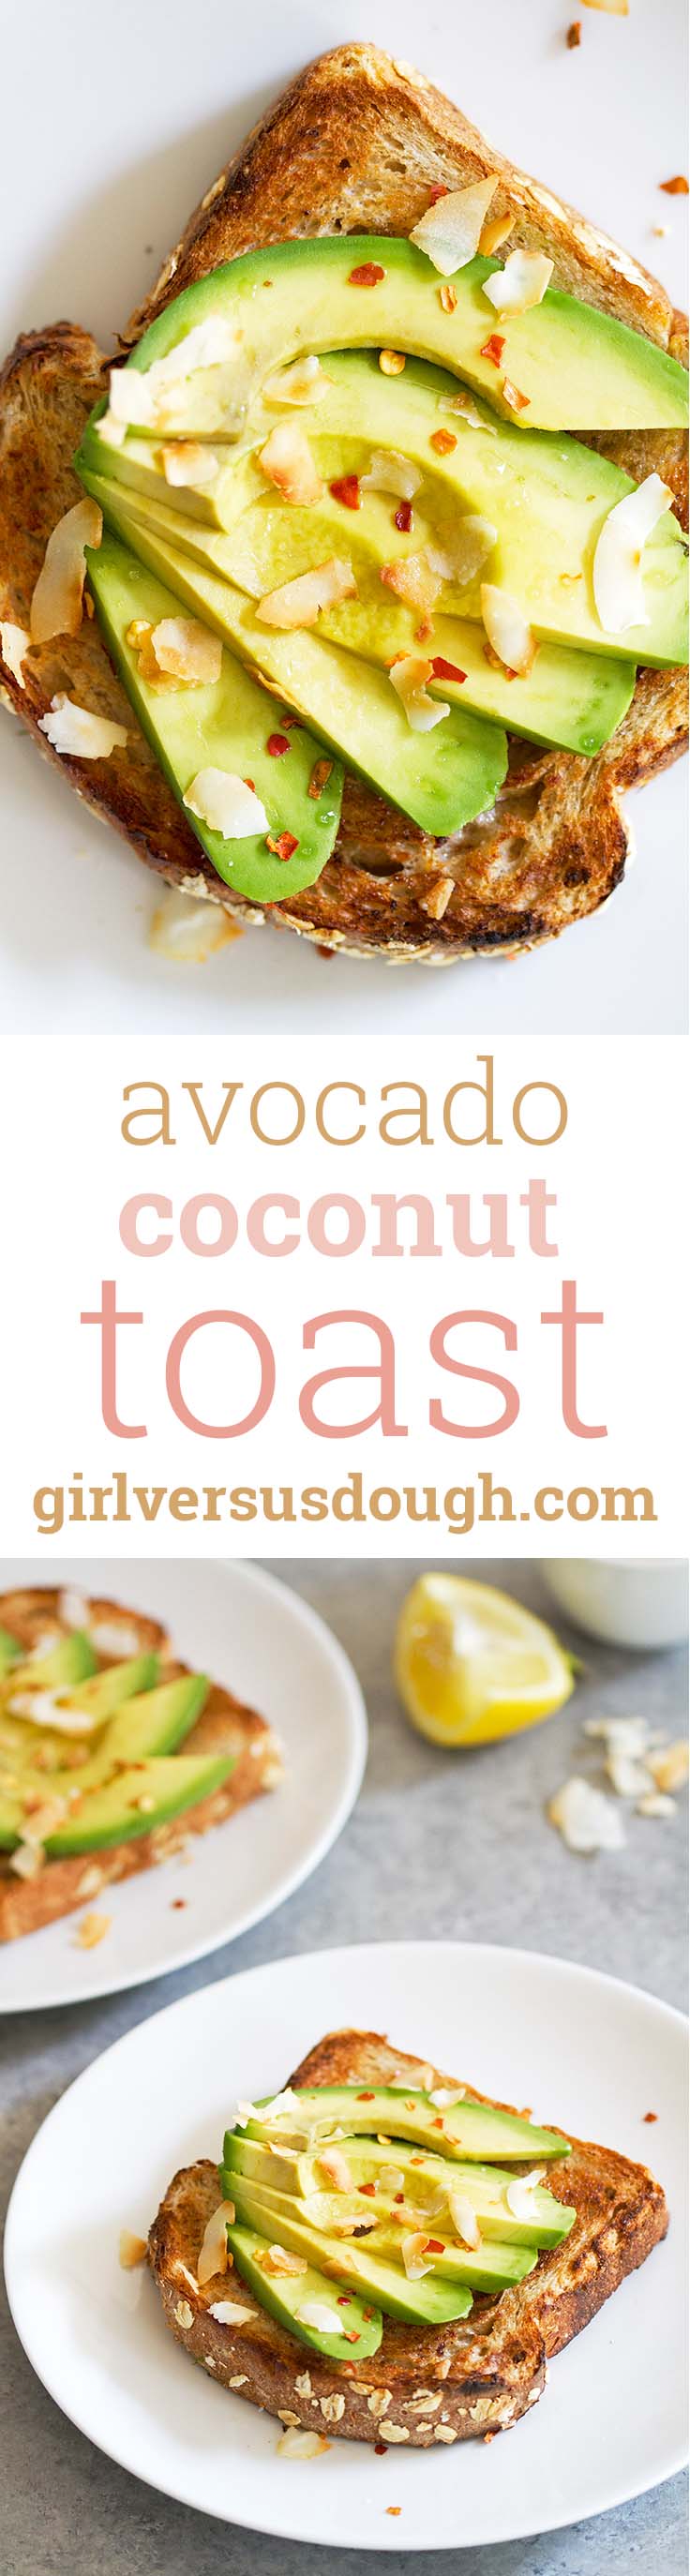 Avocado Coconut Toast -- Up your toast game with this combination of coconut oil, sliced avocado, toasted coconut flakes and fresh lemon. www.girlversusdough.com @girlversusdough